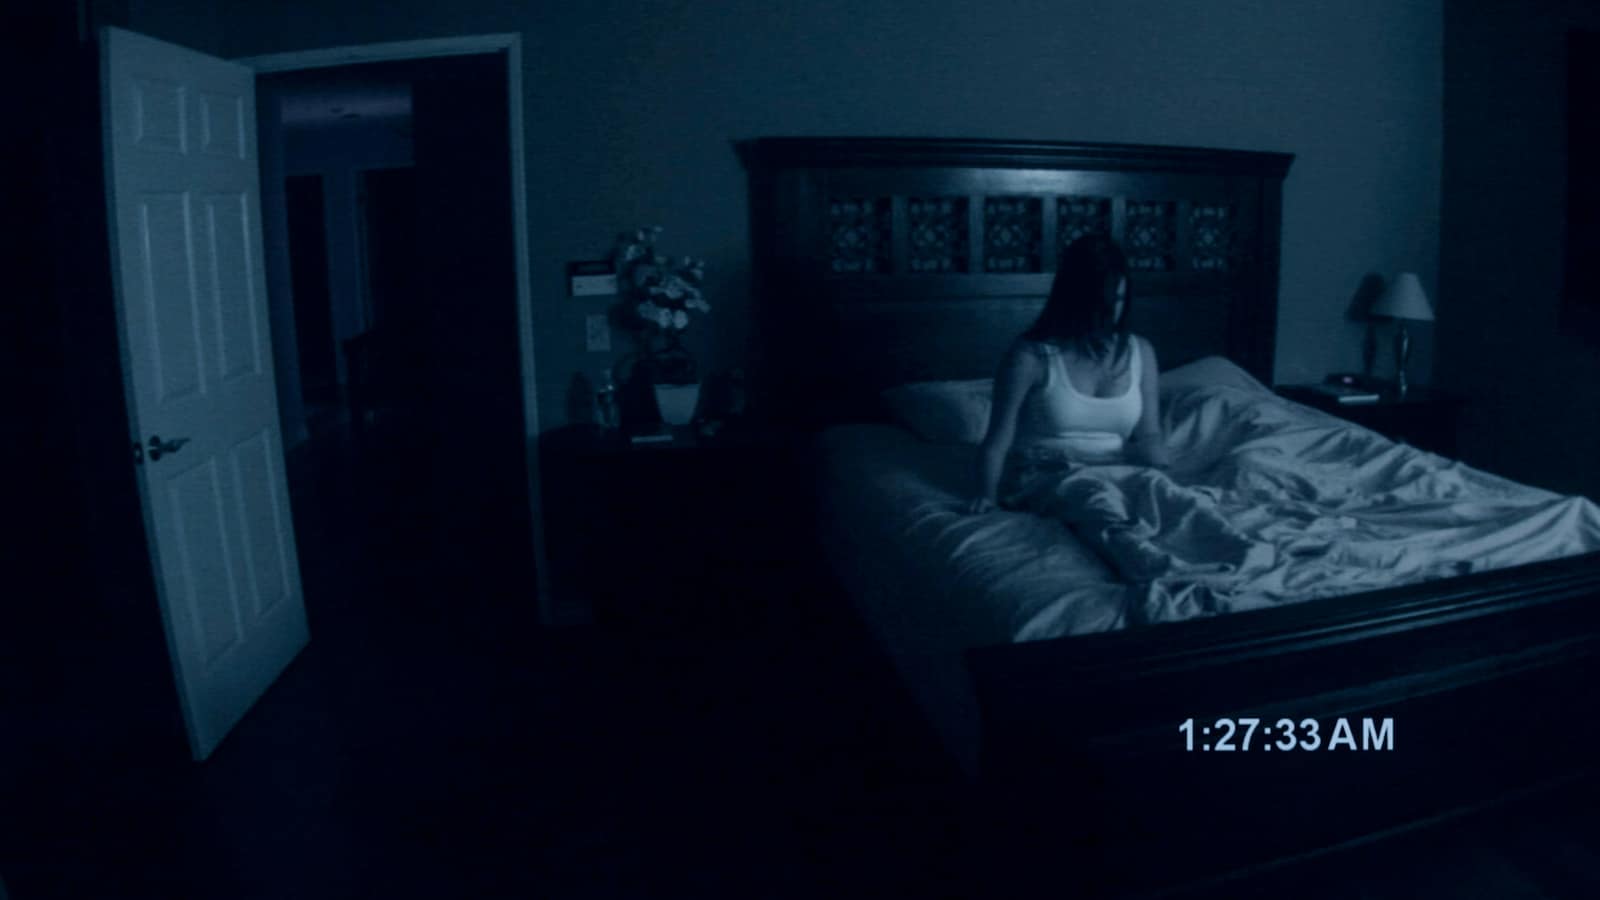 paranormal-activity-2007